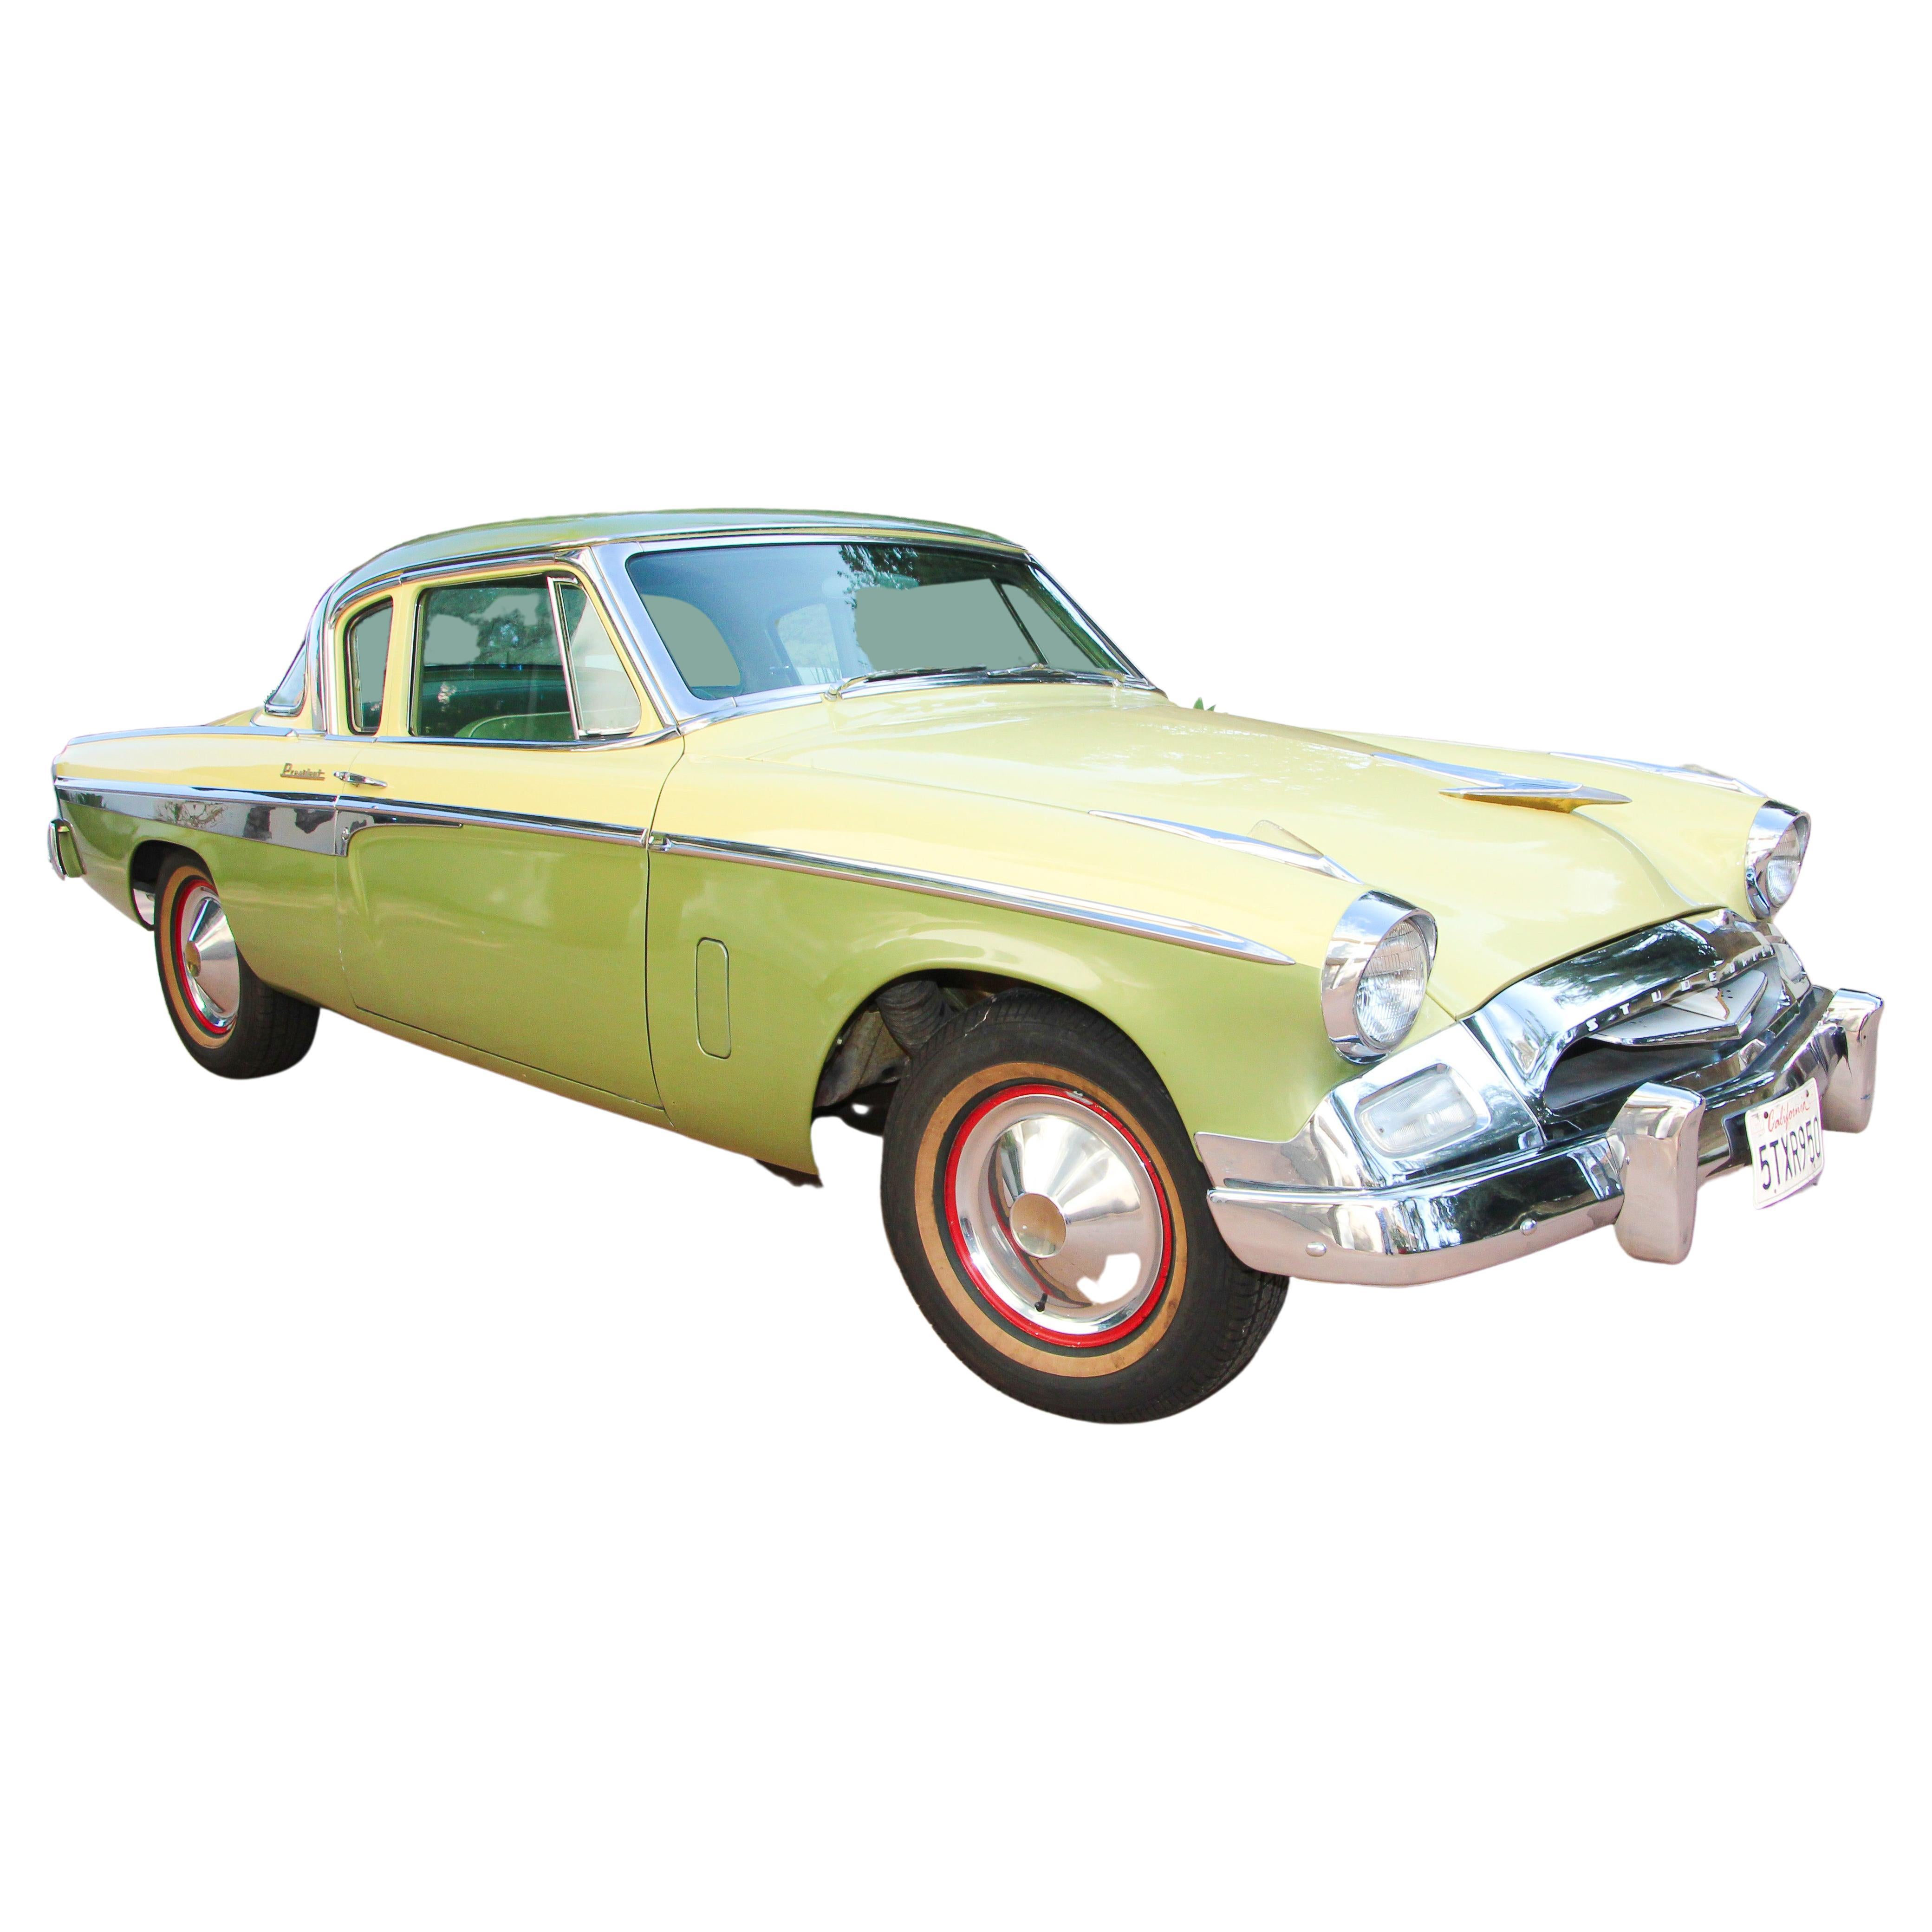 Studebaker President 1955, Collector Car Yellow and Lime Green